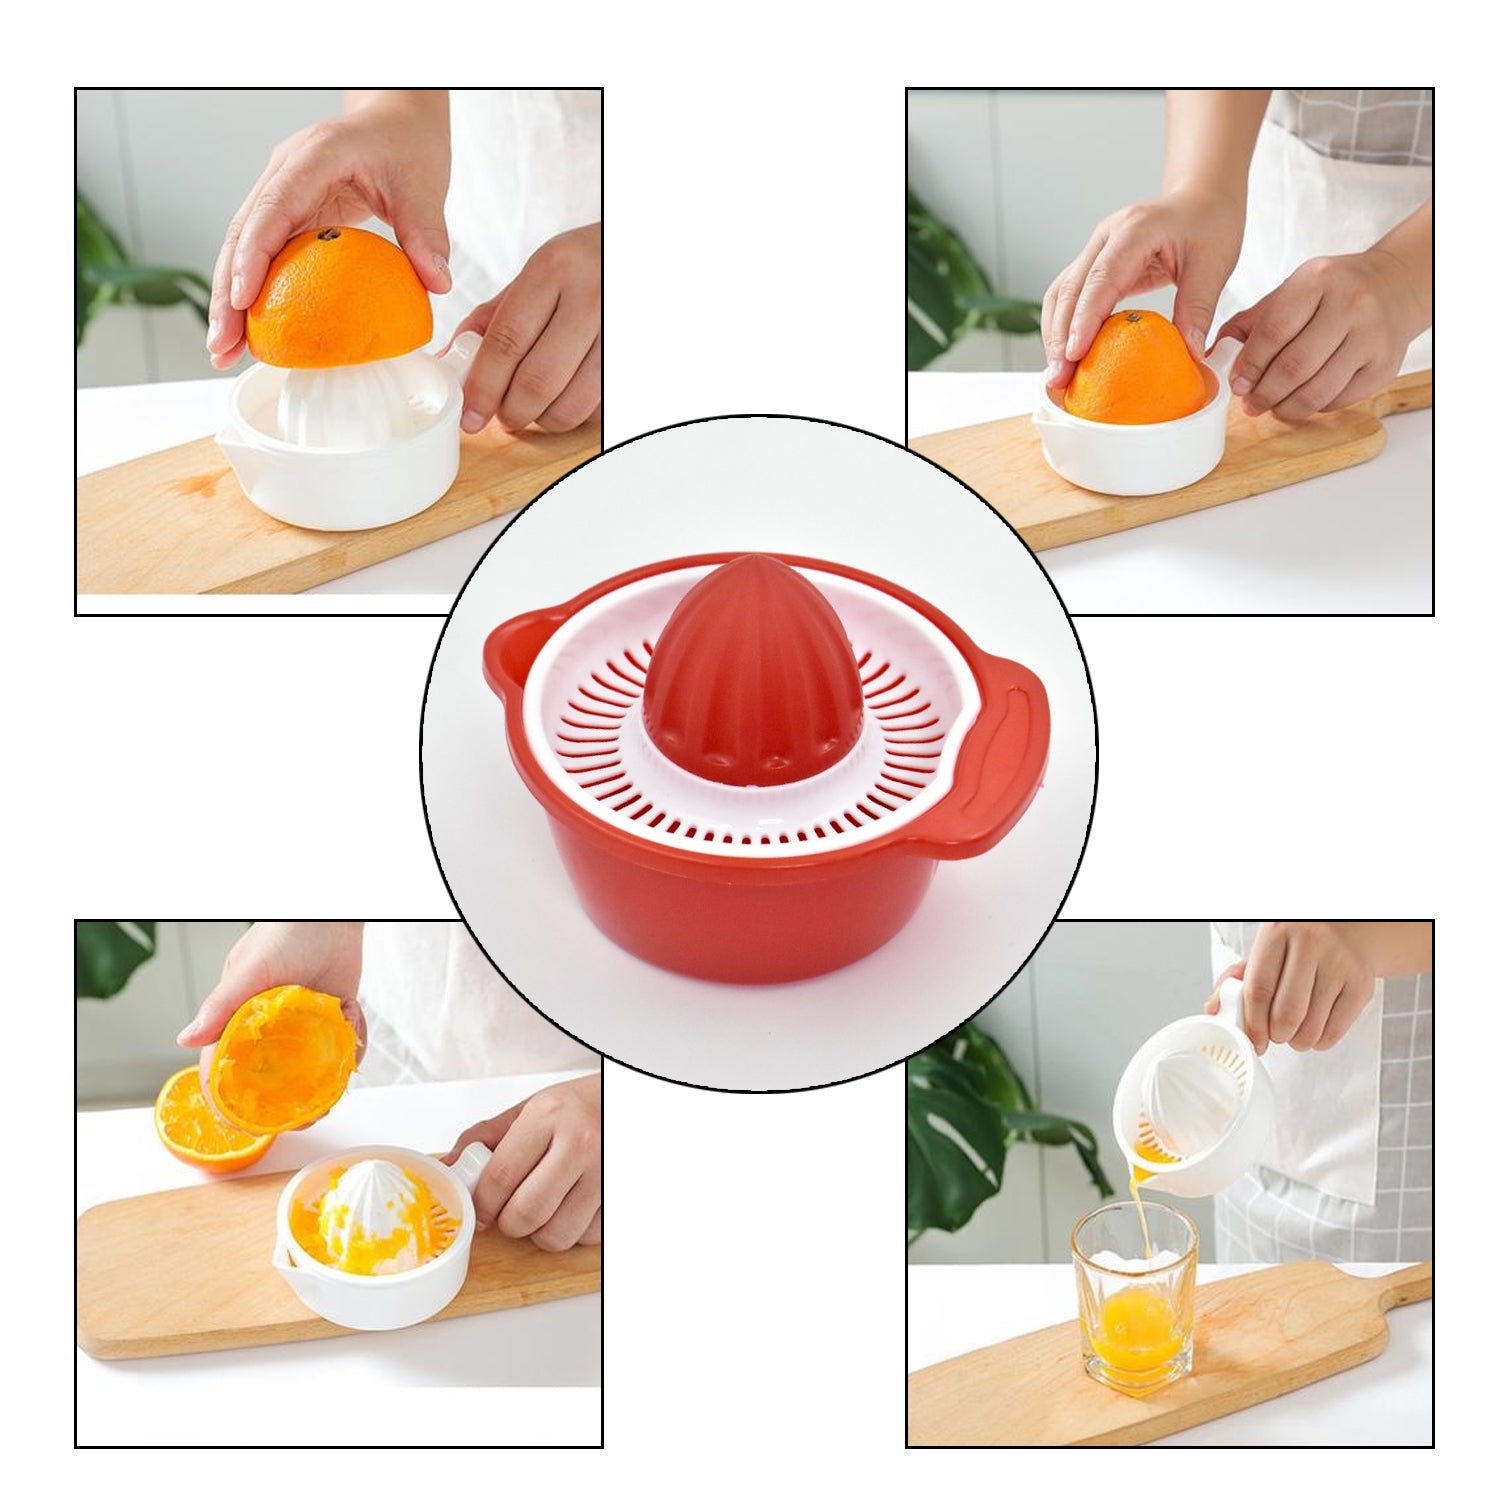 2793 Manual Hand Juicer For Making Juices And Beverages By Using Hands. DeoDap